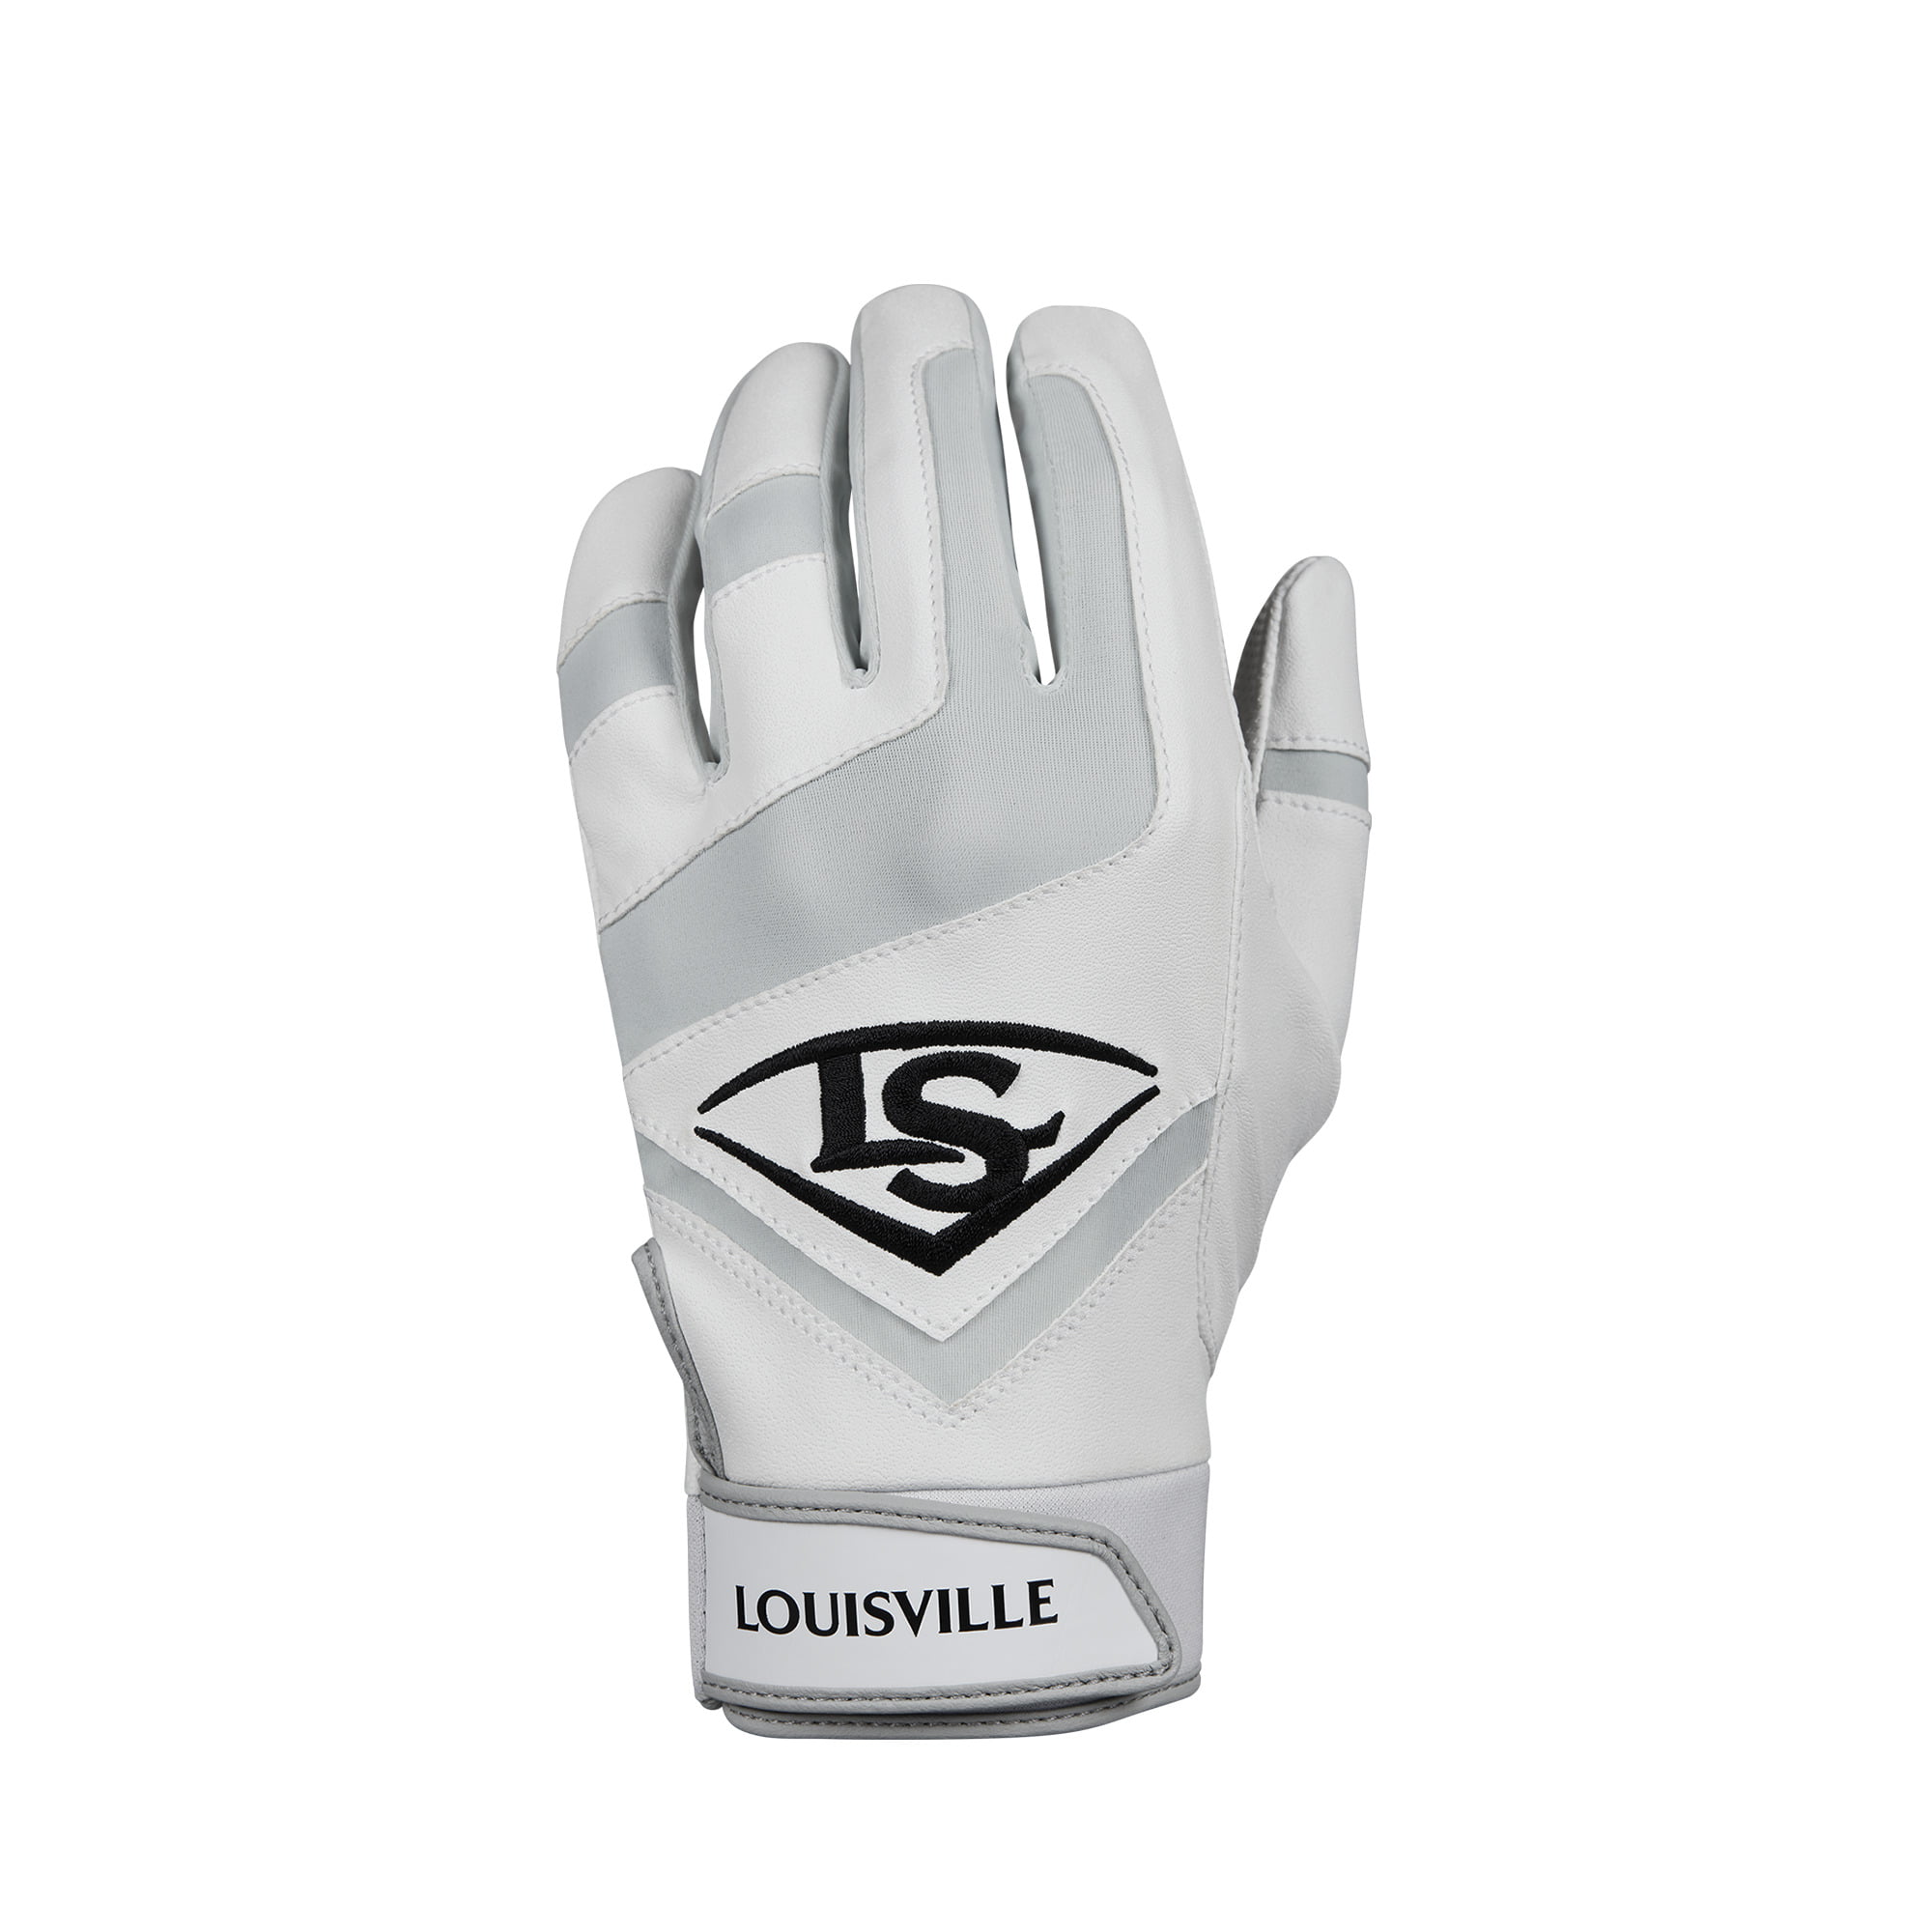 Louisville Slugger 1 Pair Batting Gloves Youth's White/Red New Large 